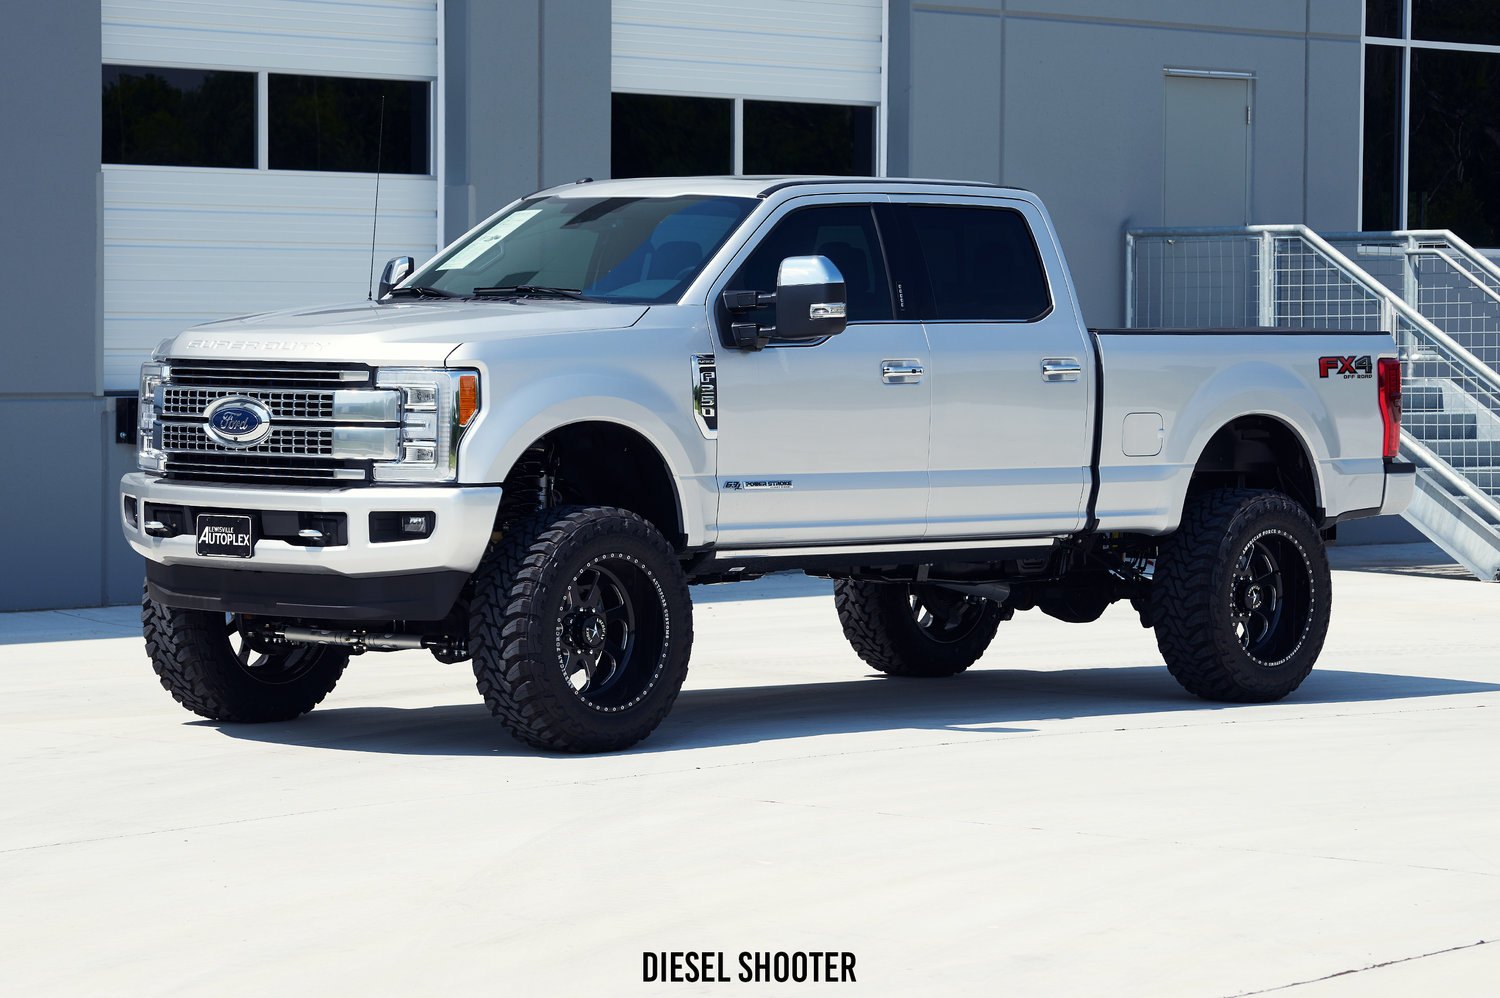 Lifted Ford F-250 on Custom American Force Wheels - Photo by Diesel Shooter